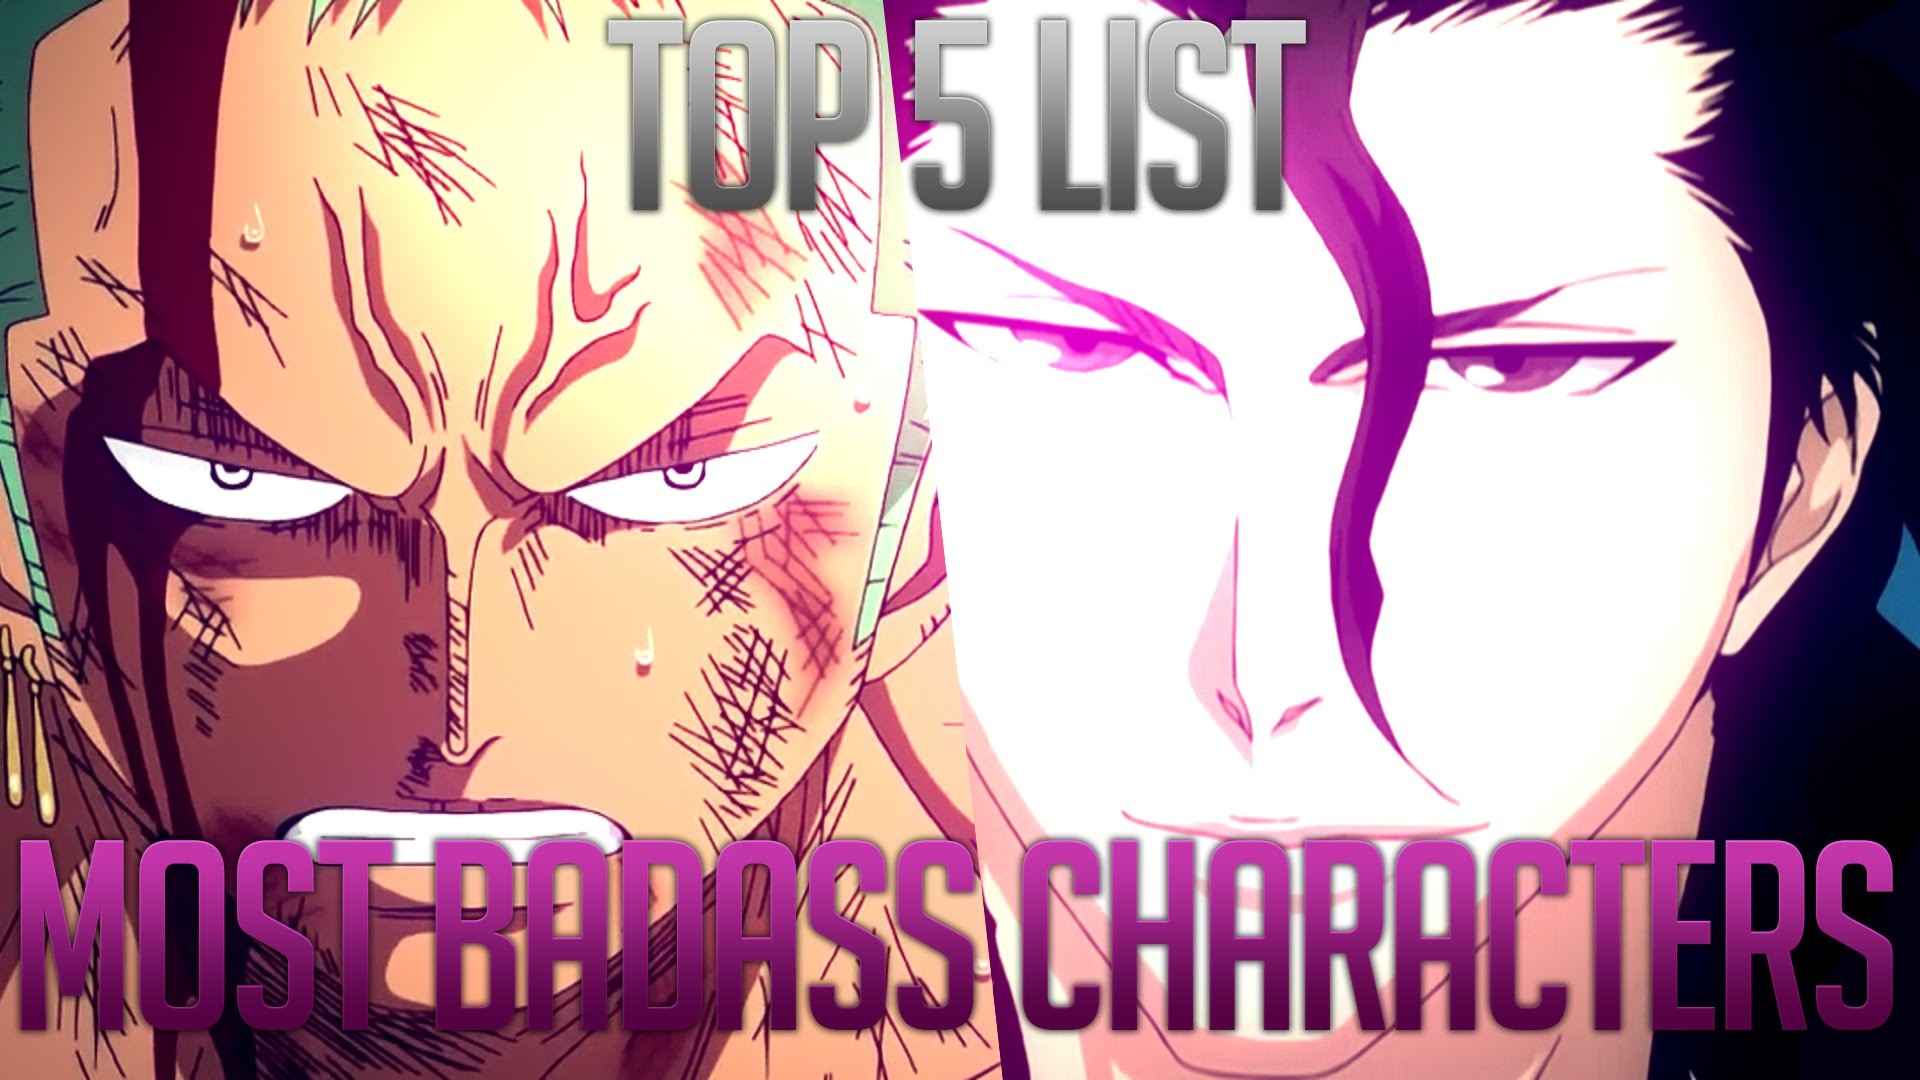 1920x1080 TOP 5 LIST: MOST BADASS ANIME CHARACTERS